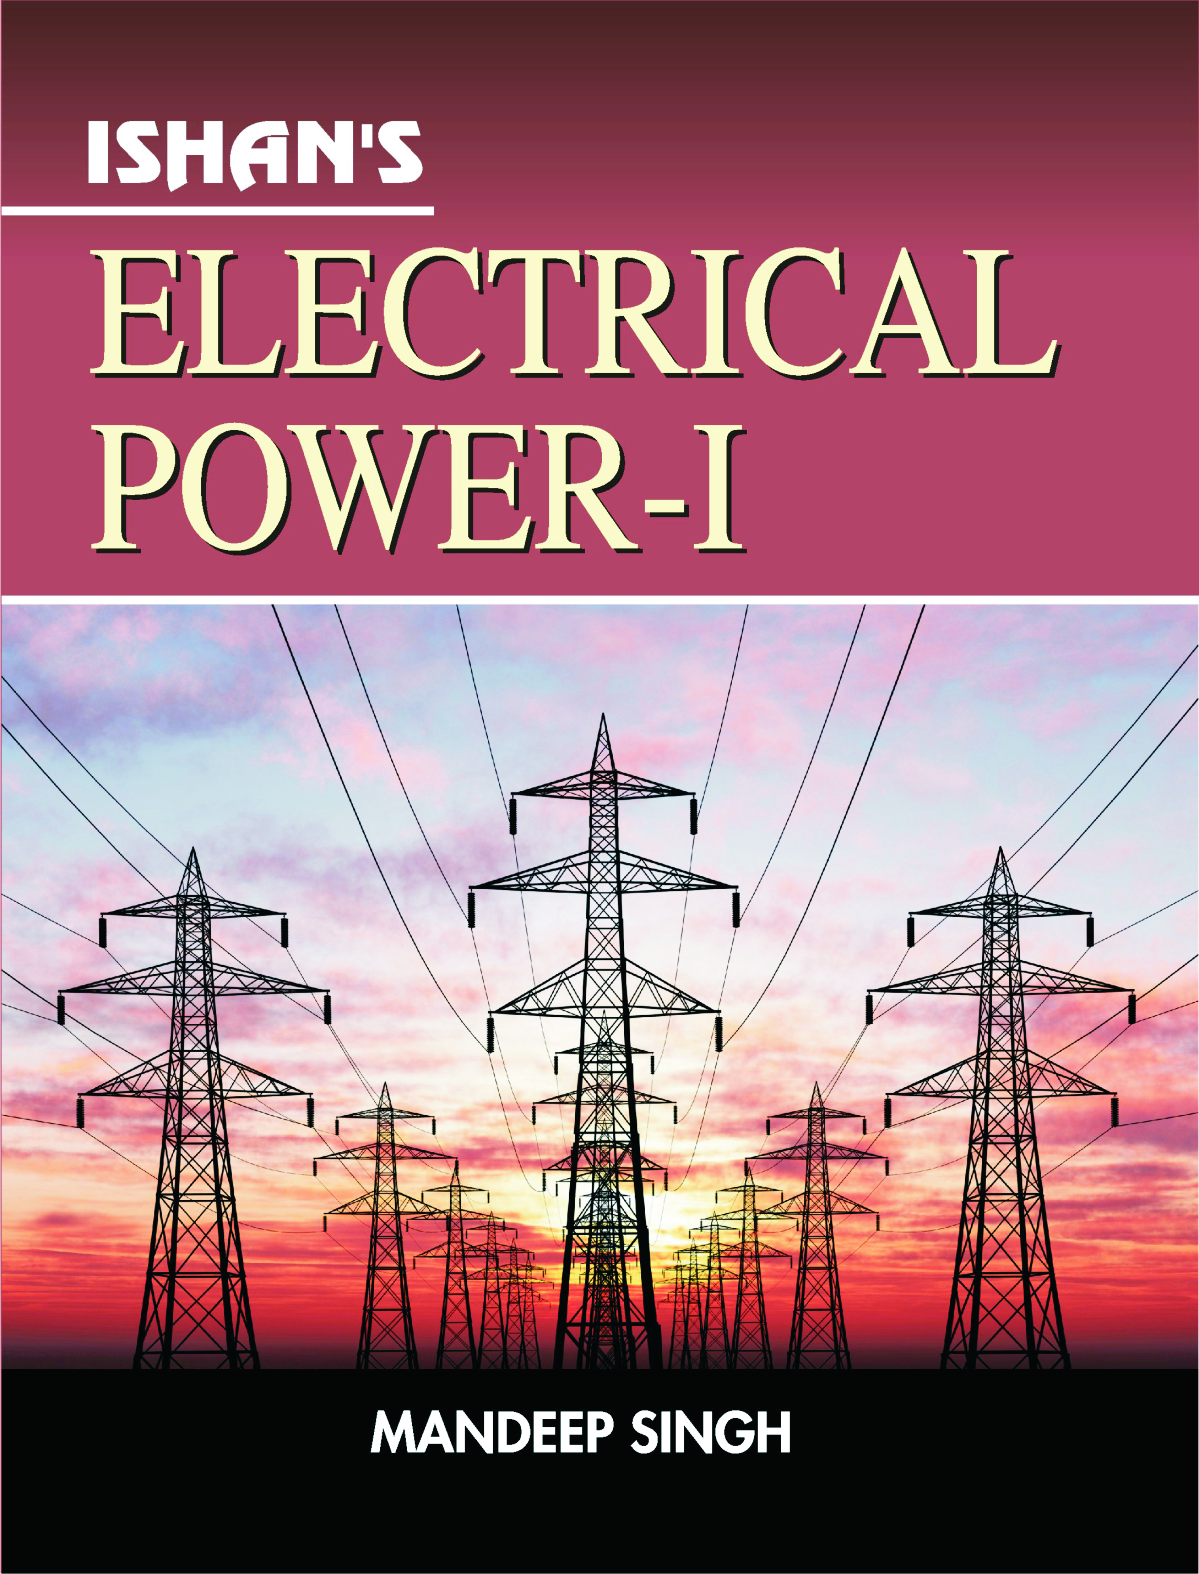 Electrical Power - I